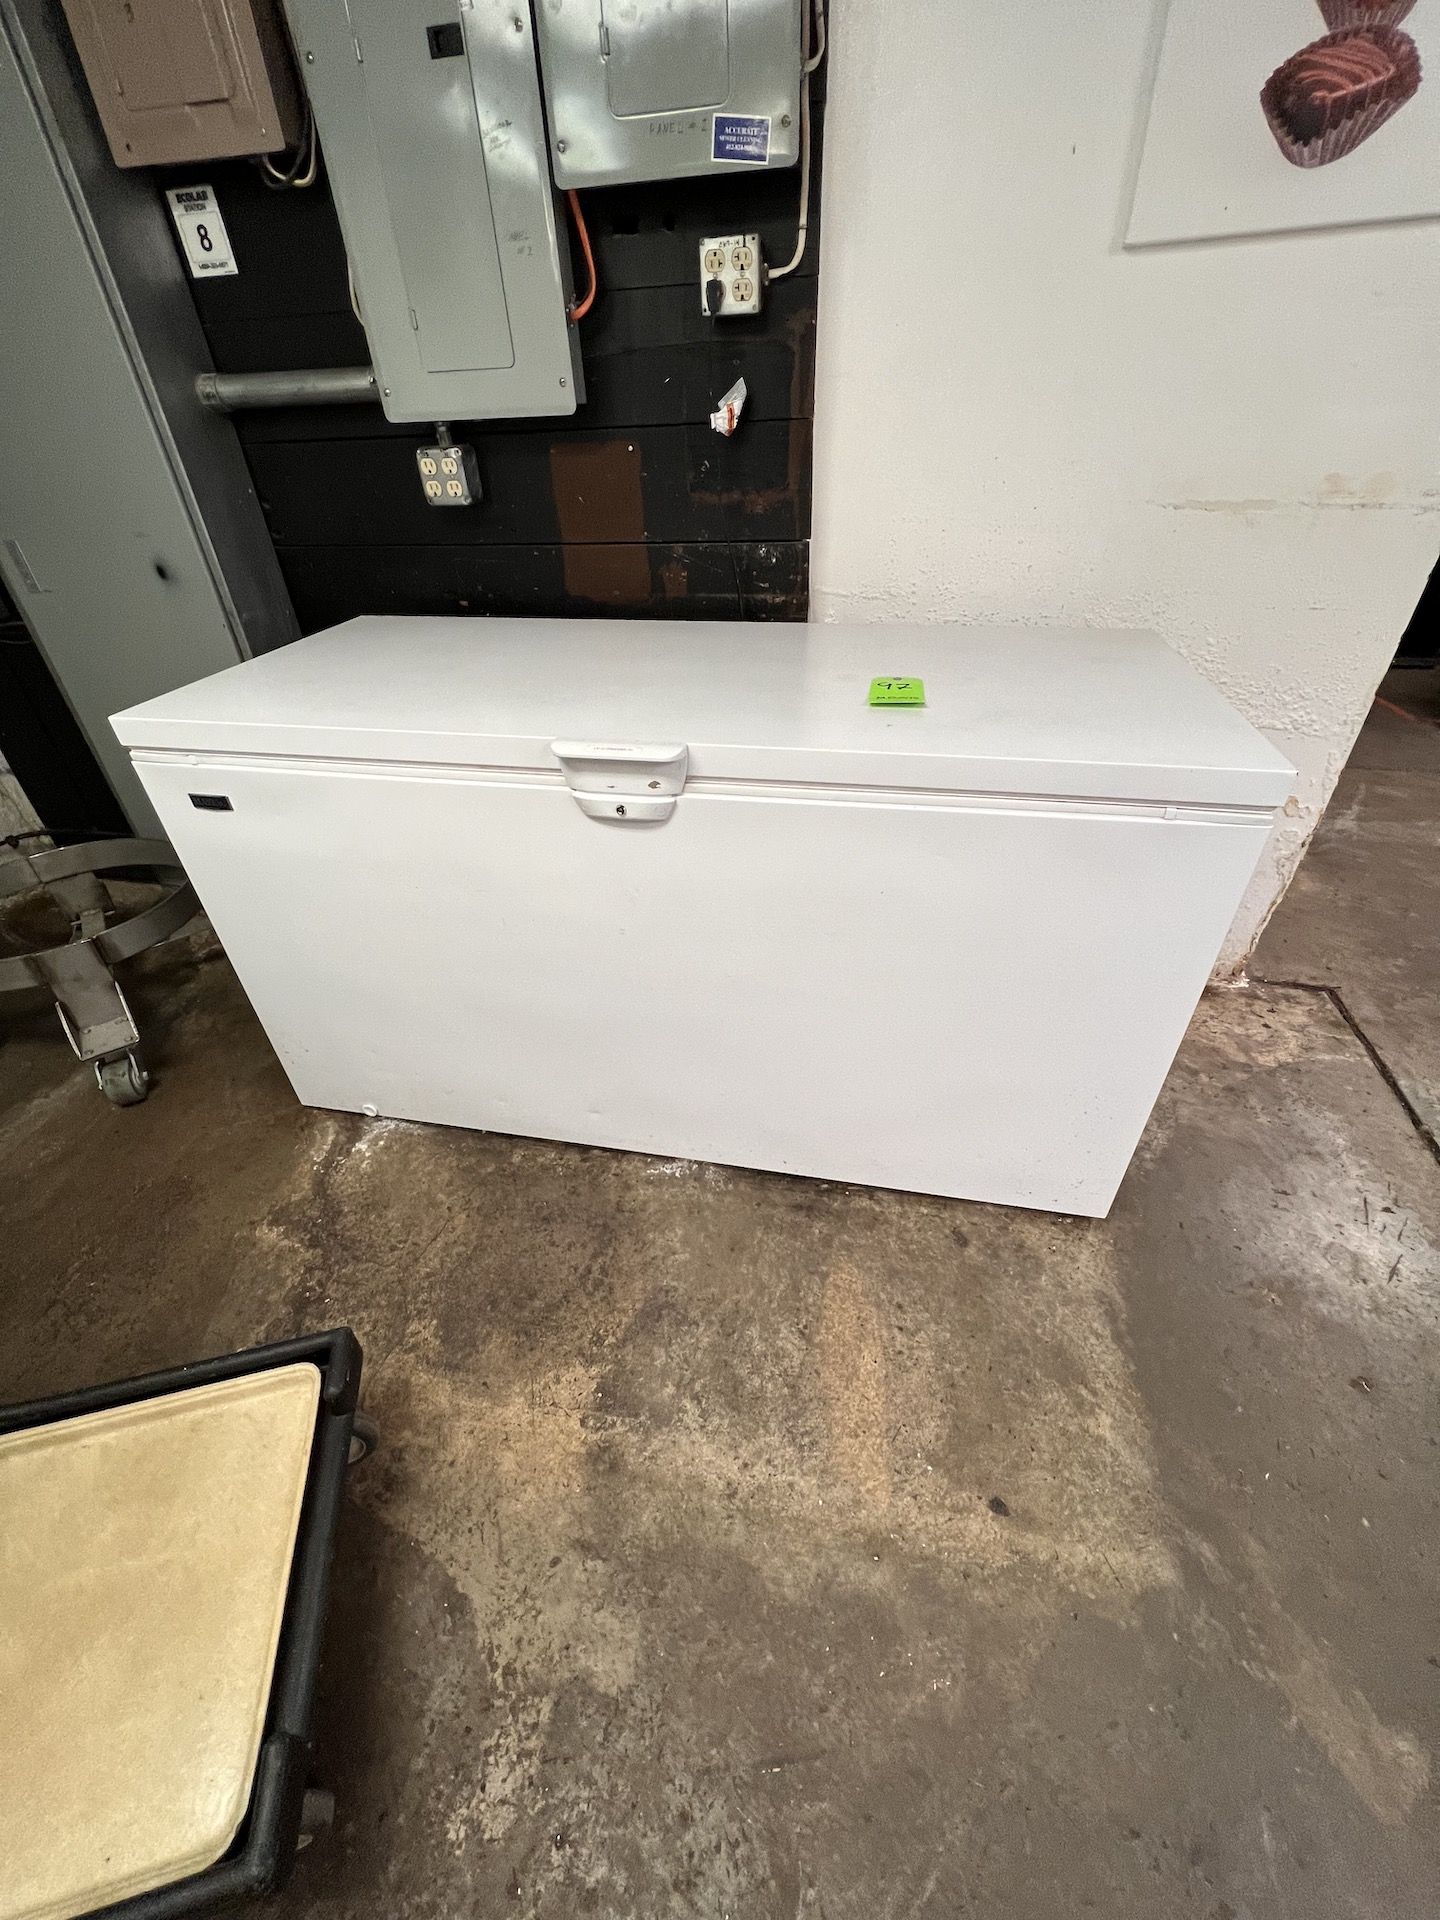 MAYTAG REACH IN CHEST FREEZER, APPROX. INTERIOR CHEST DIMS: 59" X 22" X 28"